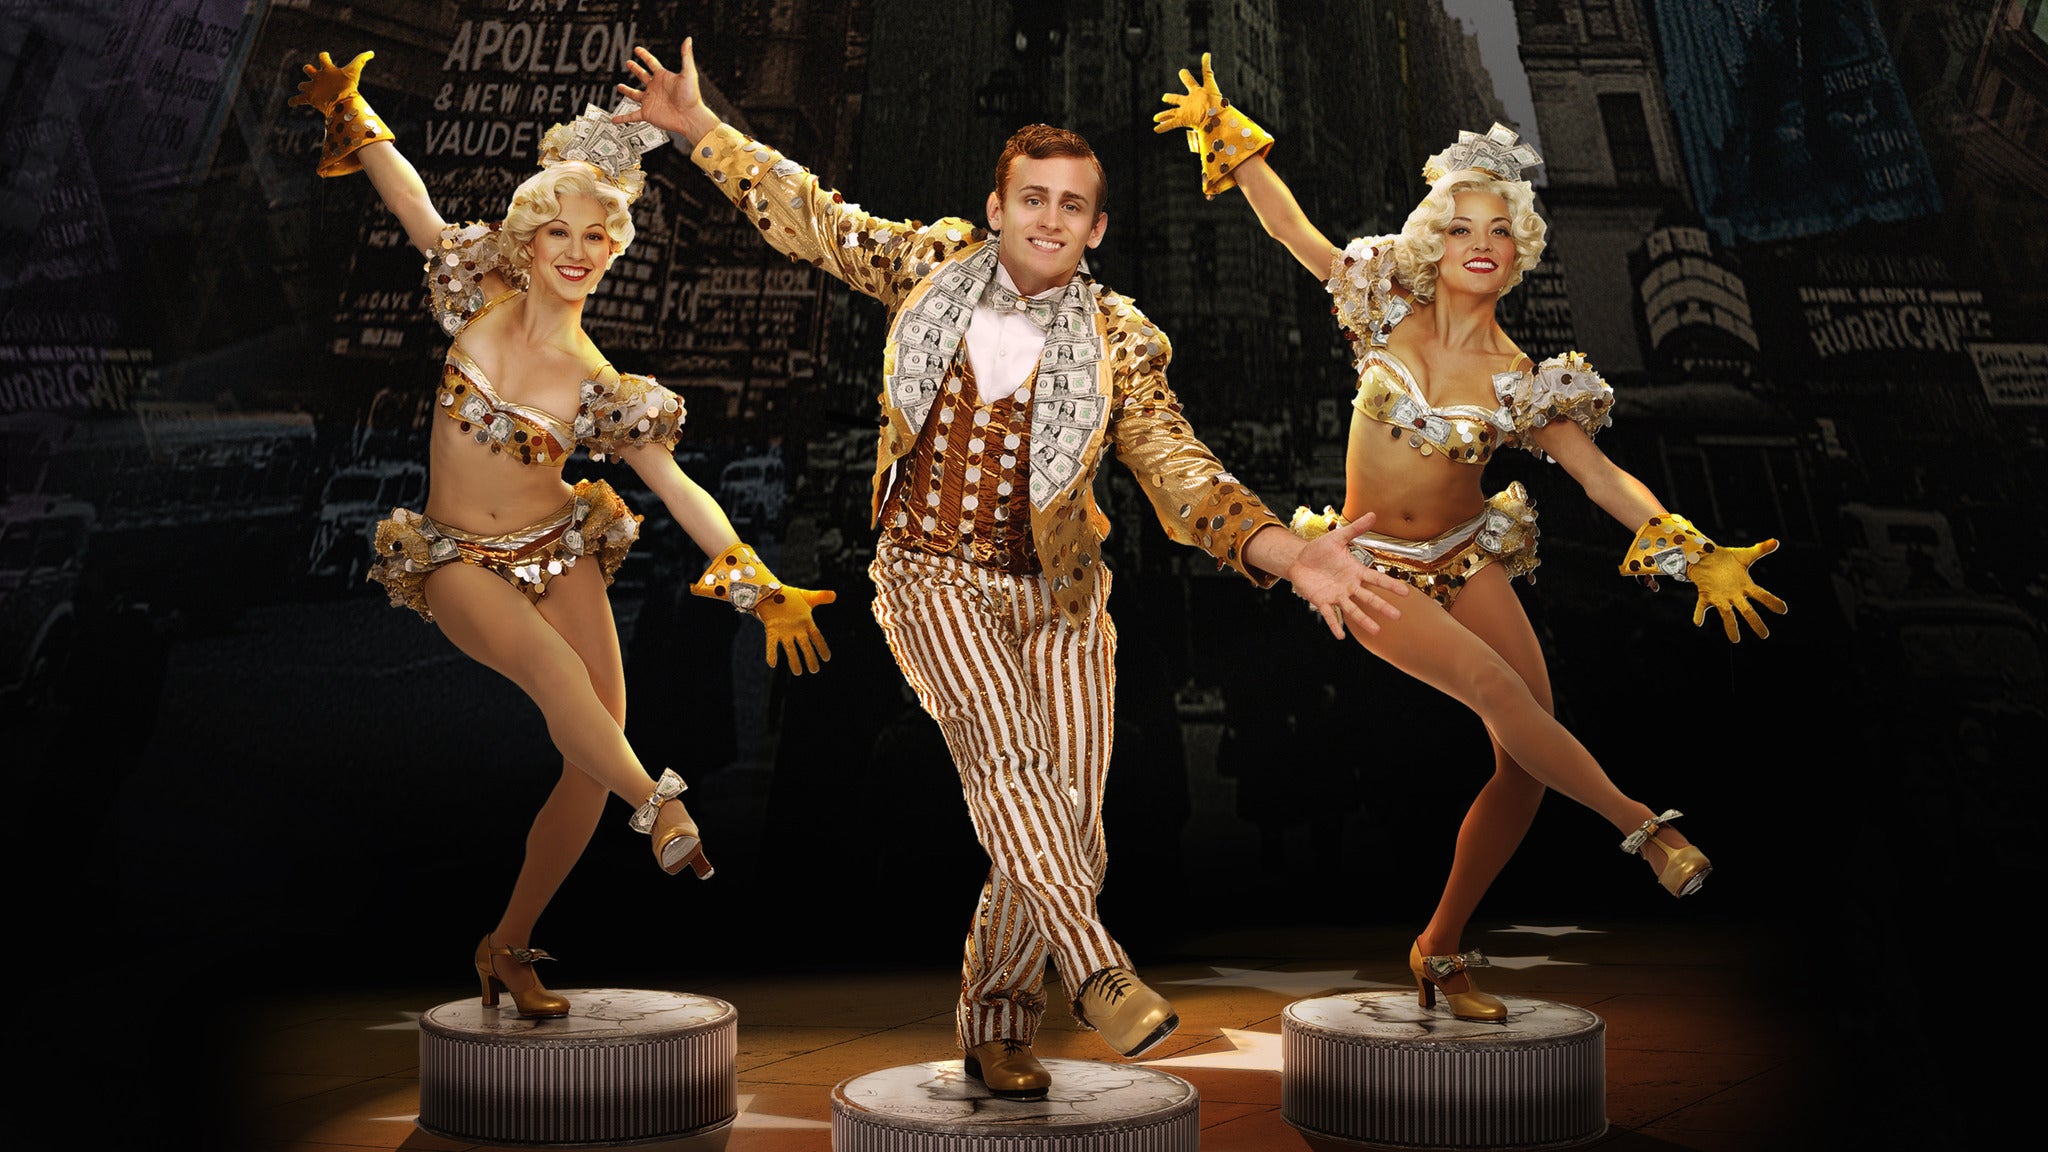 42nd STREET in San Jose promo photo for 25% Discount  presale offer code